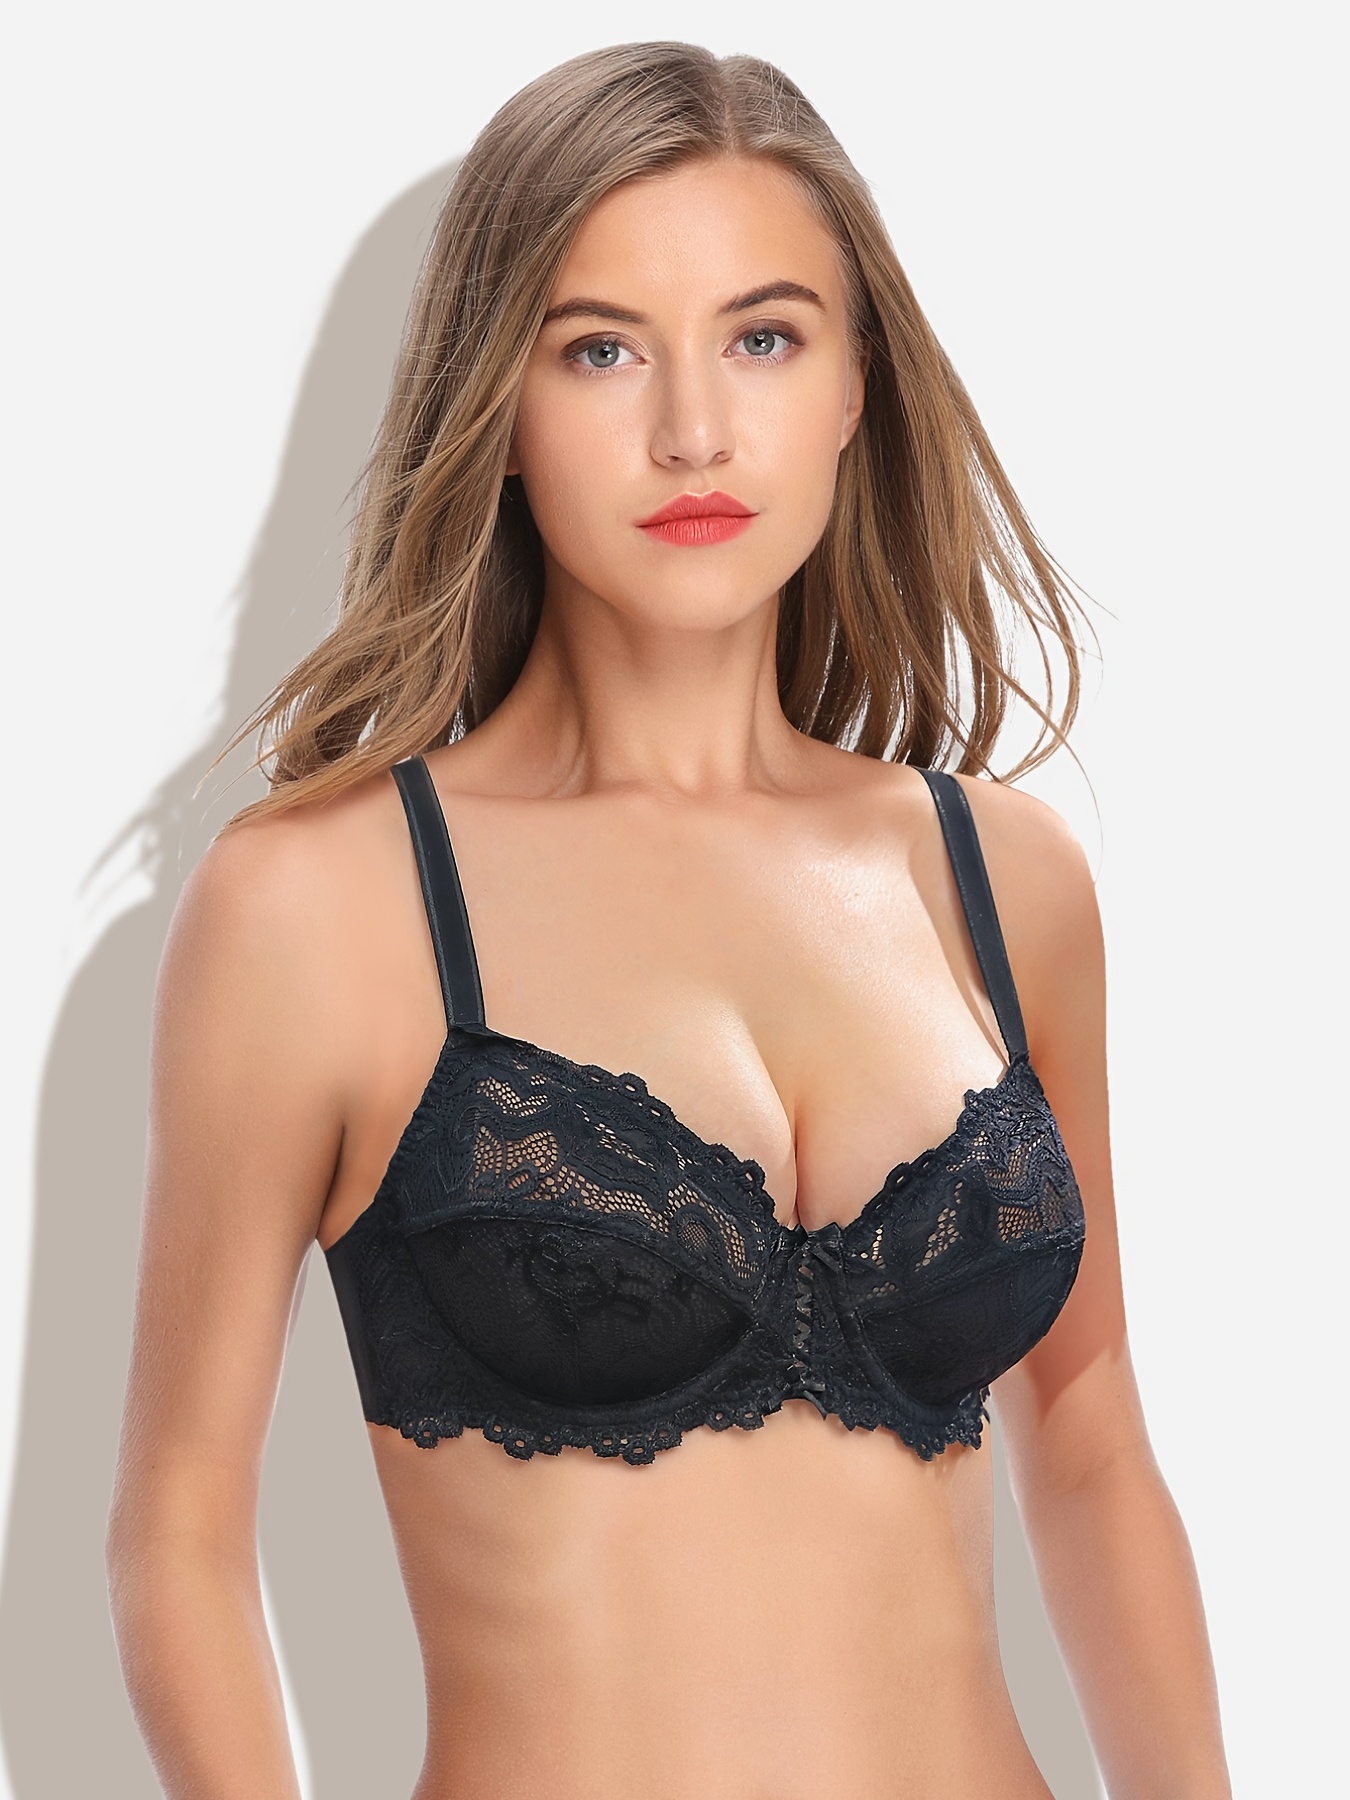 BLAKE & CO. Lace Bra, Sexy Bra, Lace Bras for Women, Non Padded Bra,  Everyday Bras and Comfortable Bra, Teen Bras, Lace Bras, Cute Bras, Comfy  Bras for Women, Lingerie Bra, Teen Bra Lacy Bra Black at  Women's  Clothing store